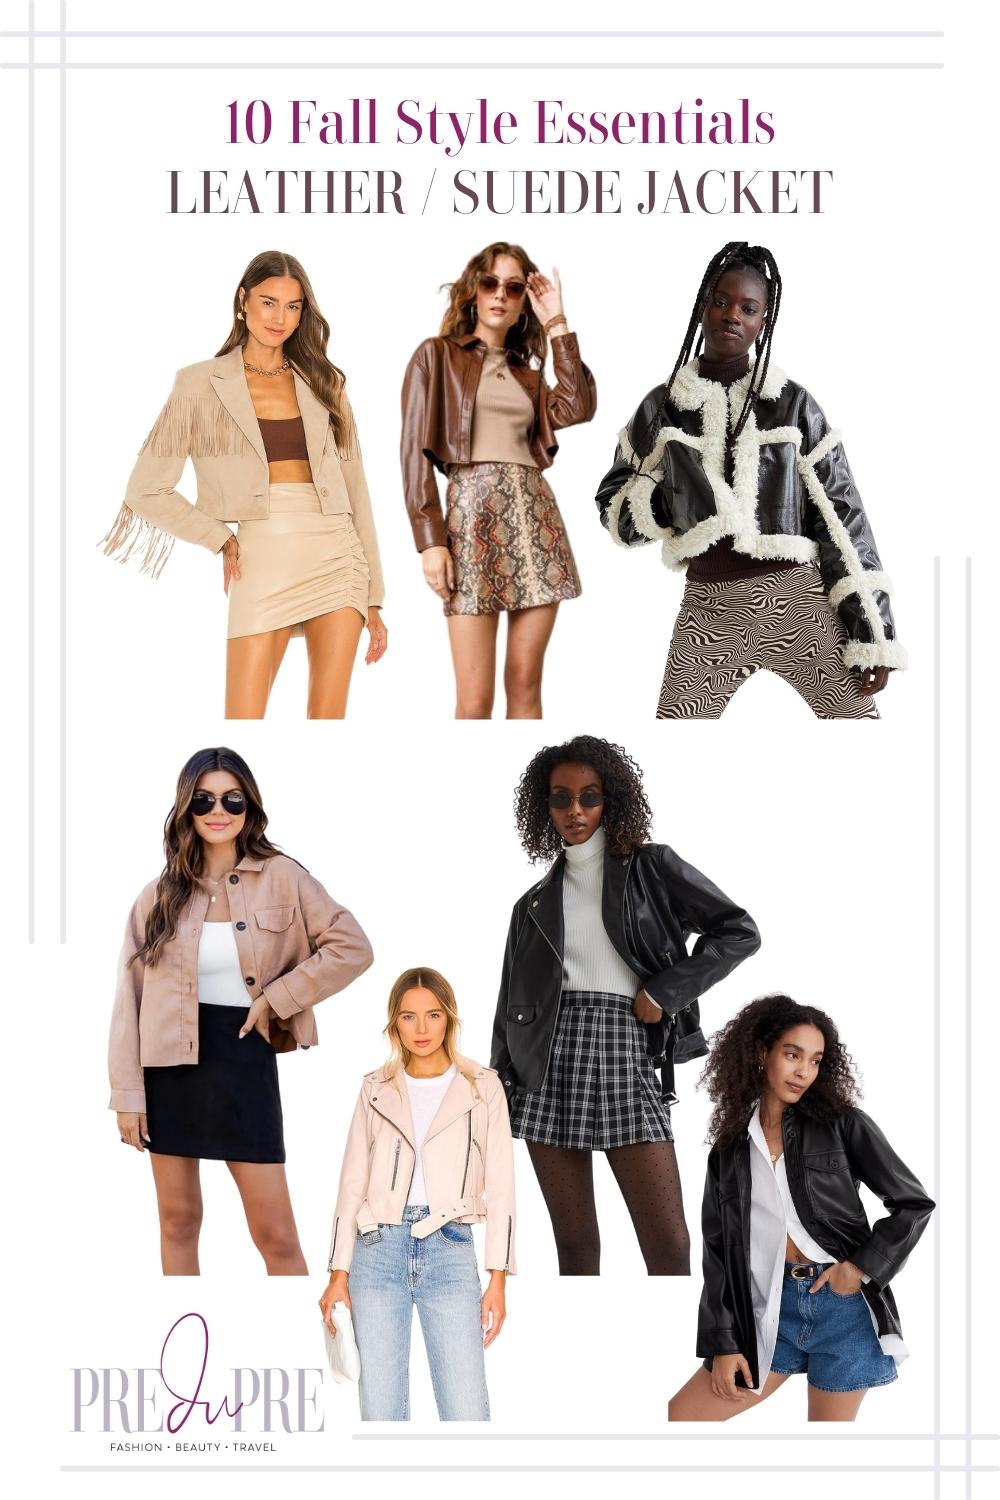 Collage of leather and suede jackets. From clockwise: nude brown fringed cropped suede jacket, brown leather jacket, leather and fur jacket, black leather jacket, black leather moto jacket, pastel pink leather moto jacket, and nude suede jacket.